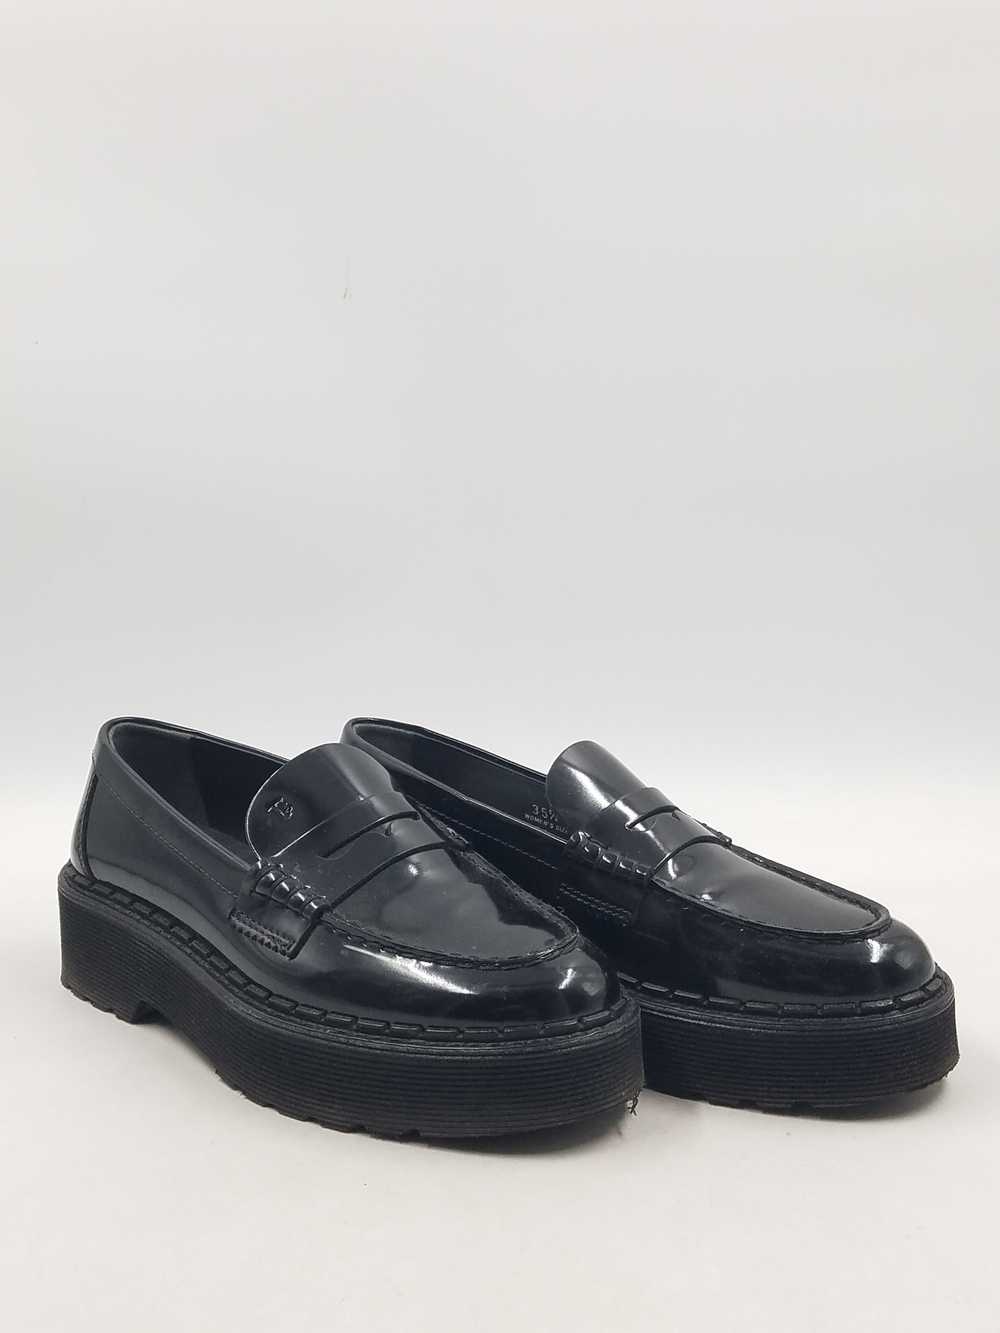 Authentic Tod's Black Platform Penny Loafers W 5.5 - image 3